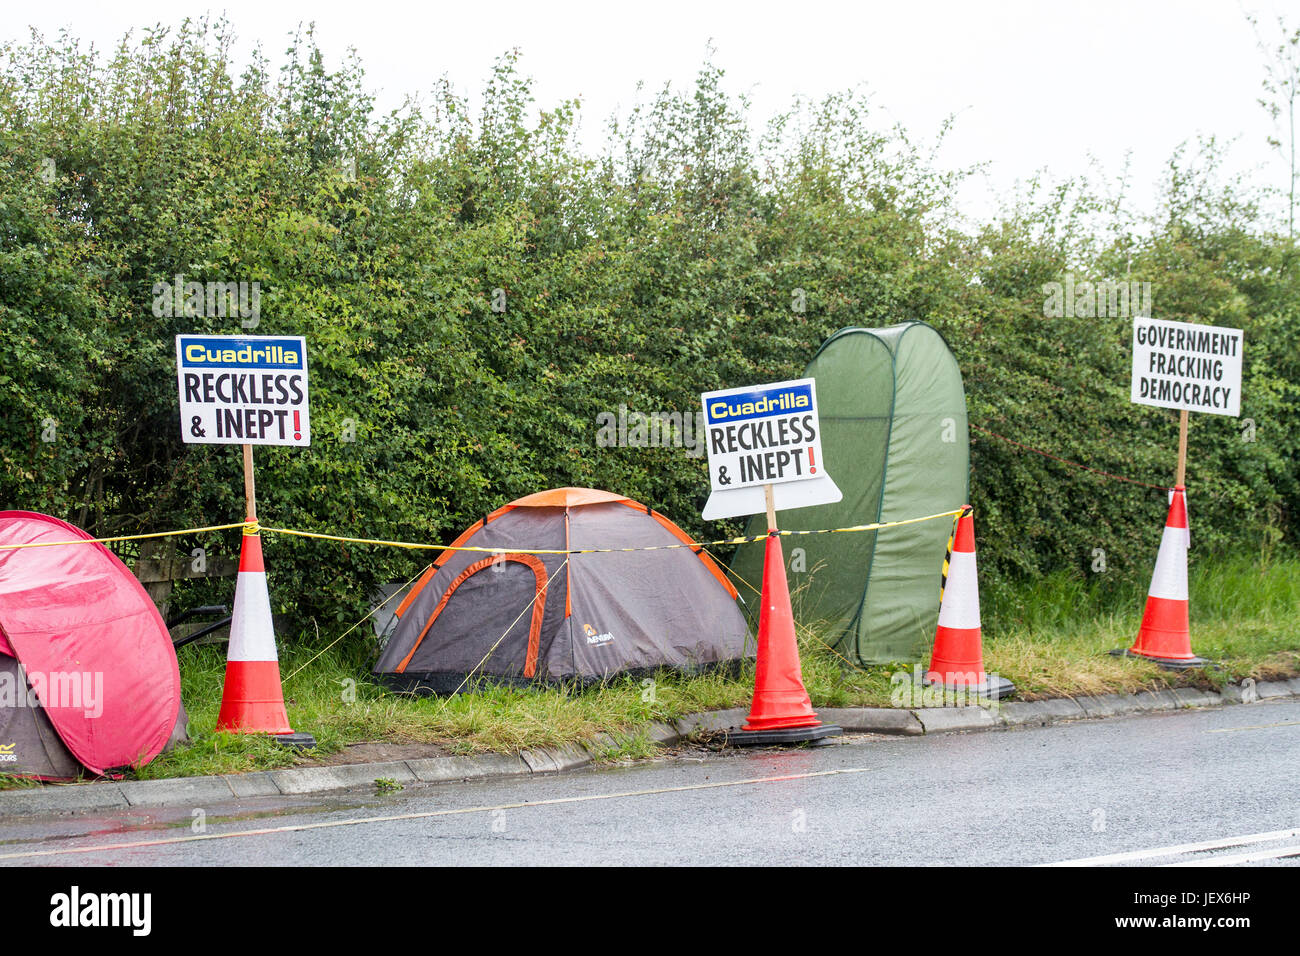 Blackpool, Lancashire, 28th June 2017. Fracking Protest continues.  Anti-fracking protesters continue to demonstrate against the Cuadrilla Experimental Site at Little Plumpton near Blackpool in Lancashire. The process of fracking by the deep drilling and injection of chemicals under high pressure has proved highly controversial with demonstrations all over the globe.  Credit: Cernan Elias/Alamy Live News Stock Photo